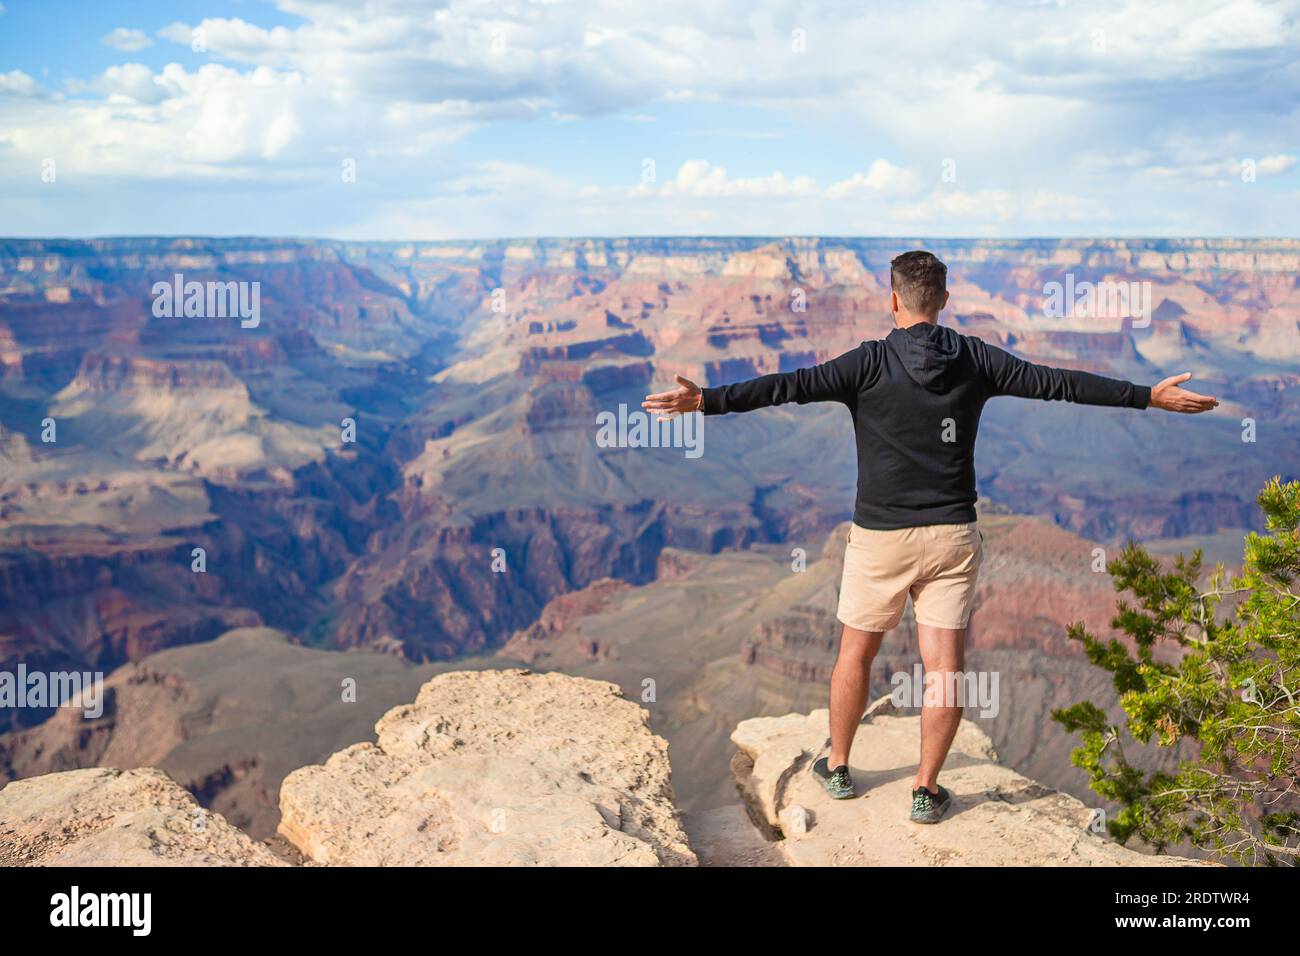 Young hiker is standing on a steep cliff taking in the amazing view ...